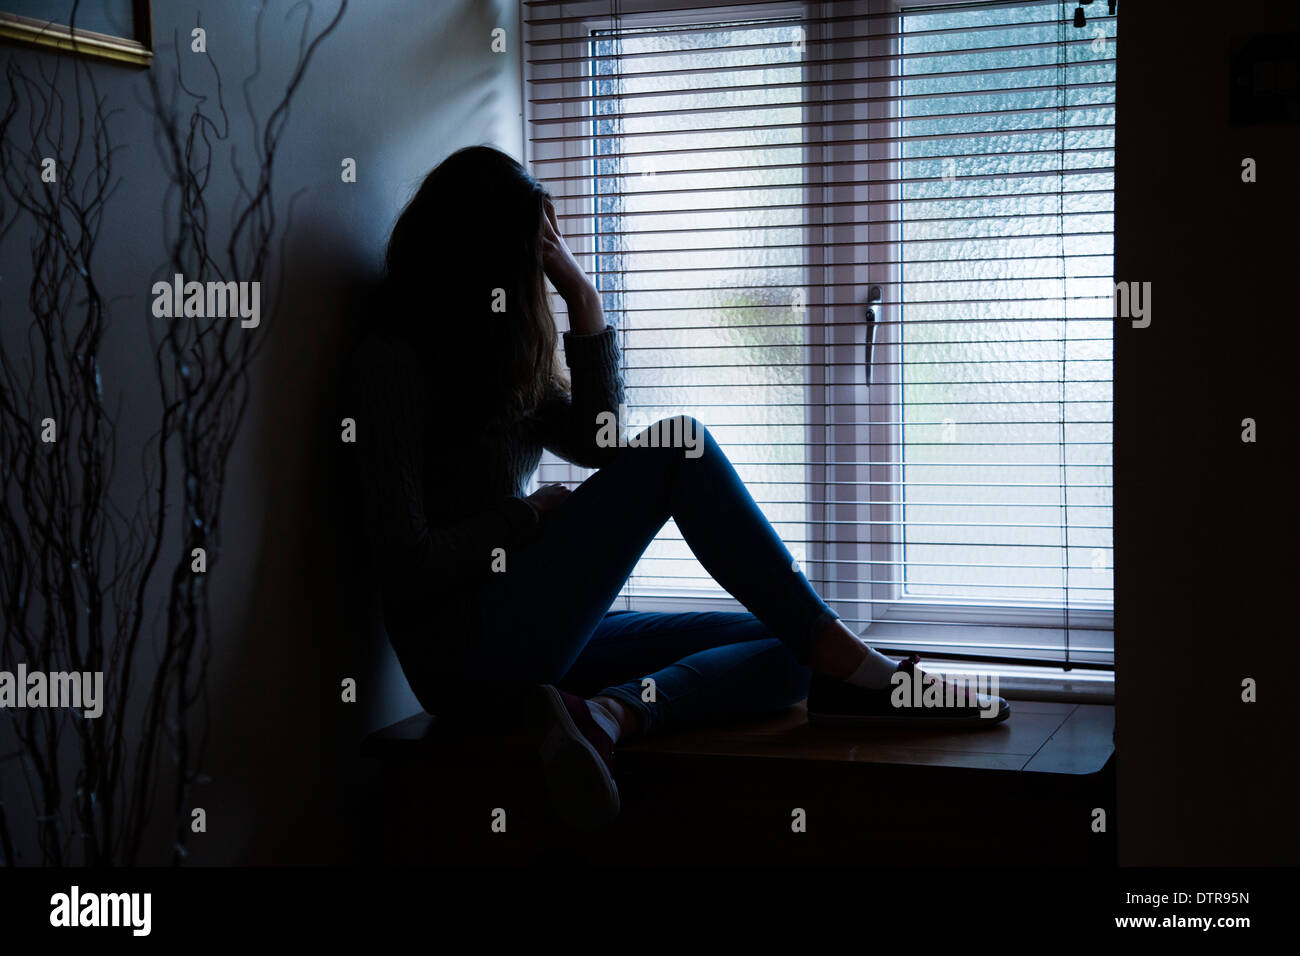 Girl with long hair wearing jeans, hand on head in despair, sitting in darkness by a window at home. Side viewpoint. Stock Photo